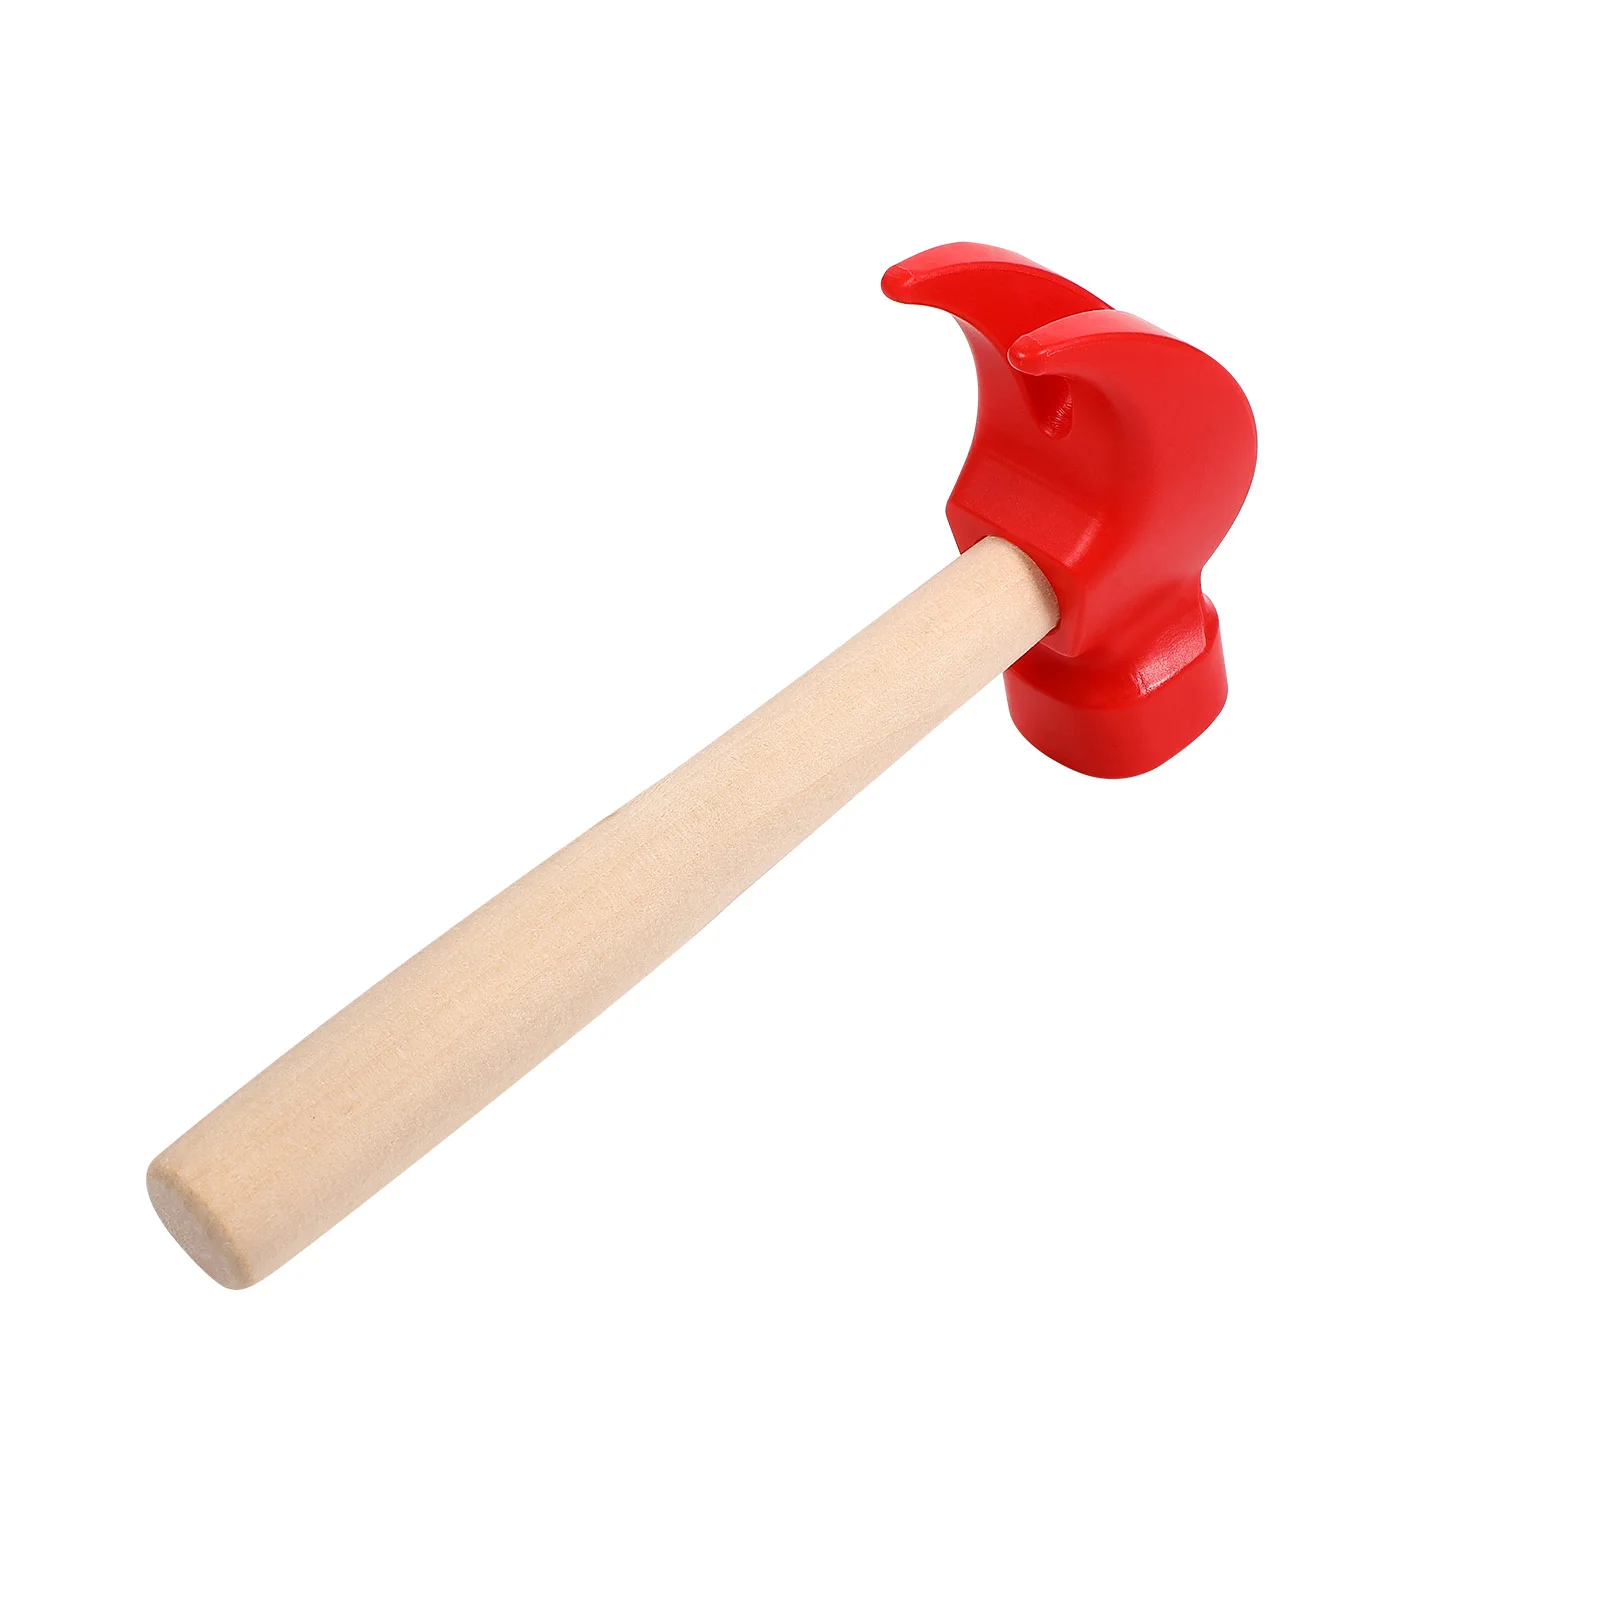 

Simulated Small Wooden Hammer Maintenance Hammers Simulation Toy Wood-handled Toys Kids Tool Children Plaything Educational